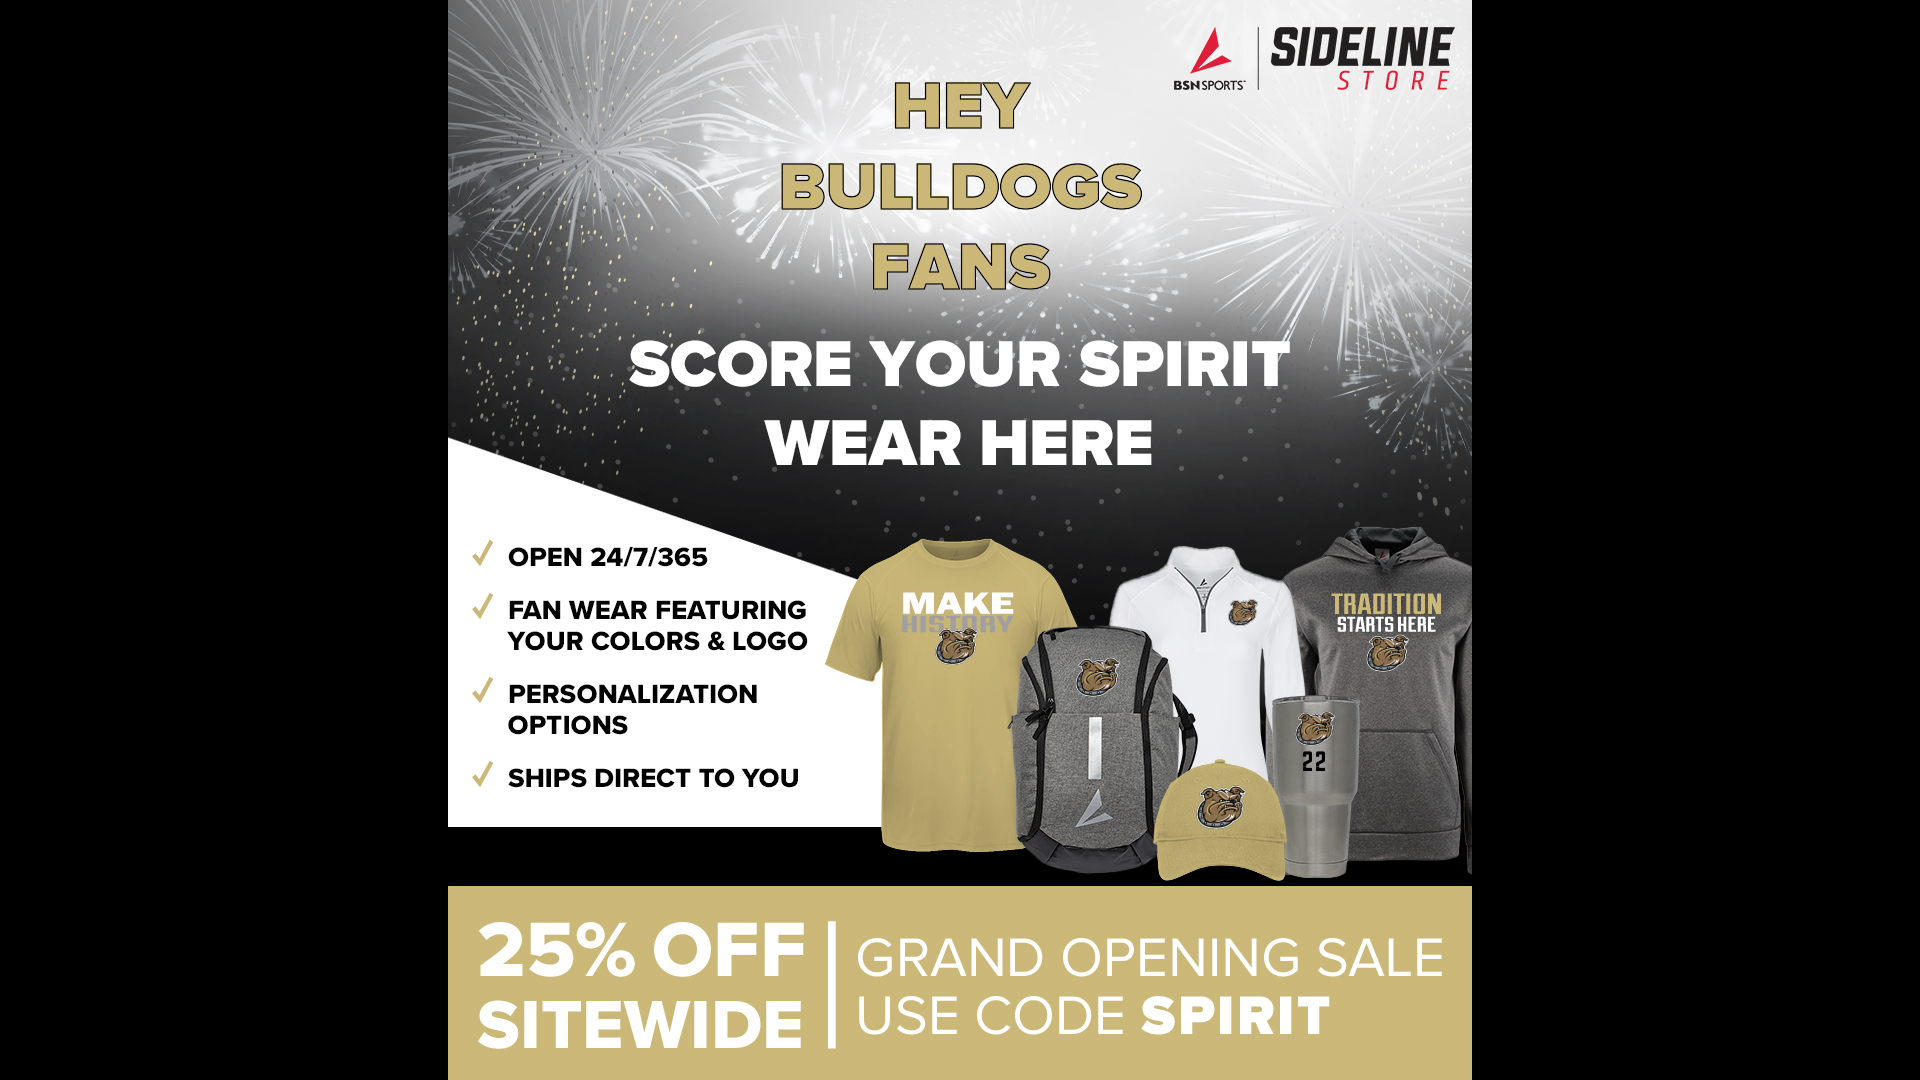 Official Bryant University Sideline Store launches